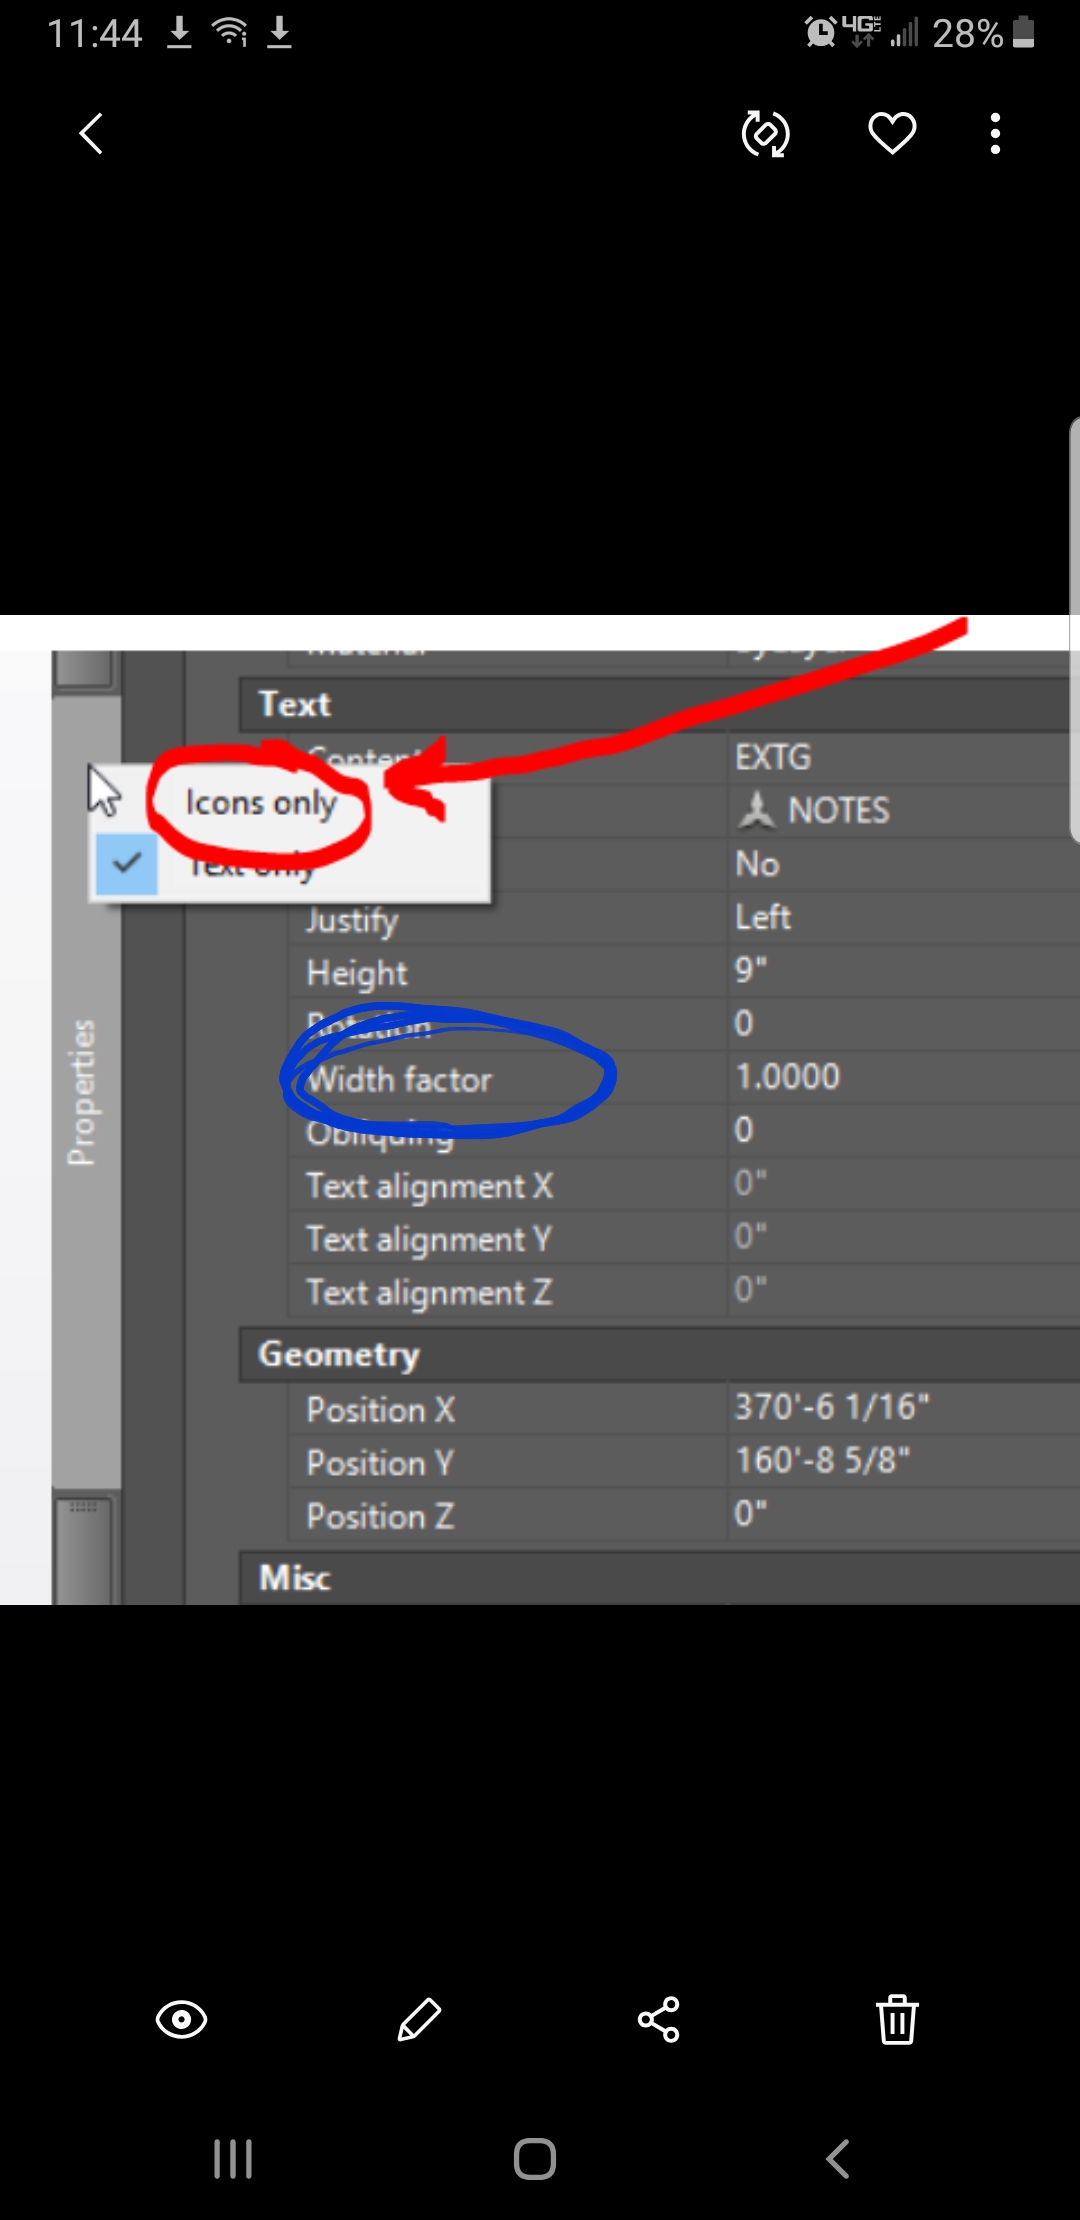 Solved: Quick formatting of MText in 2020 - Autodesk Community ...